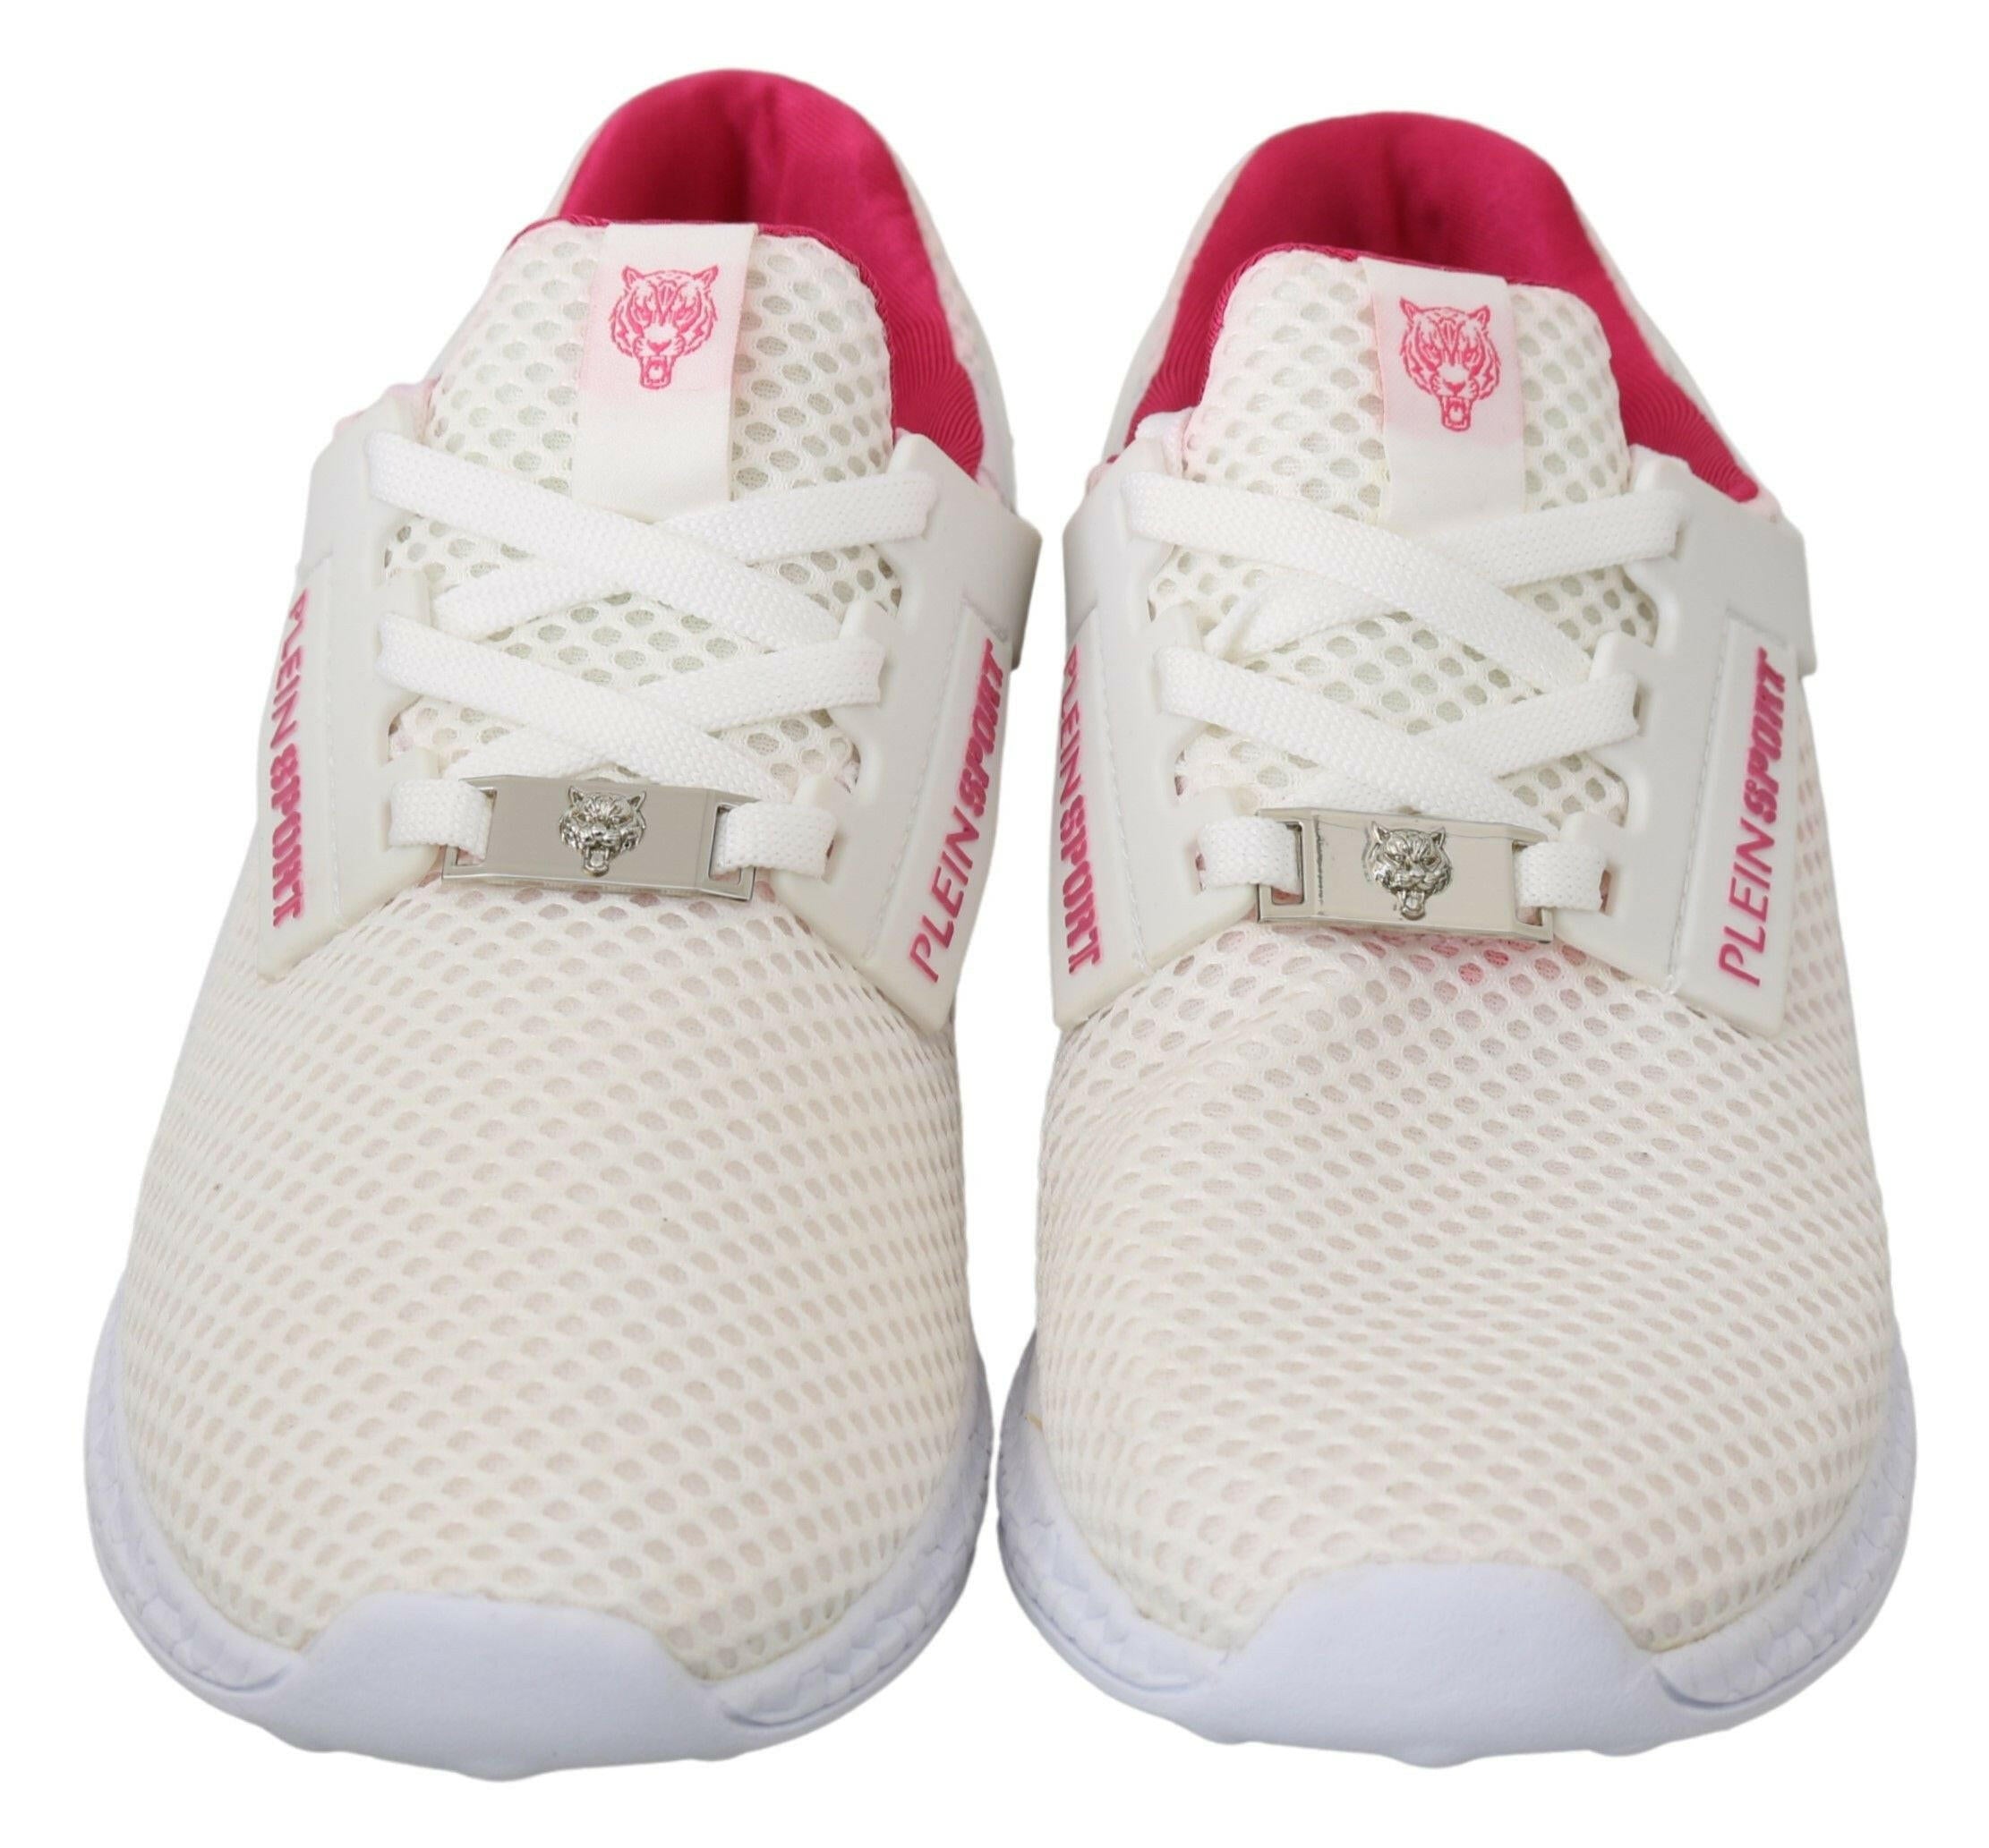 Philipp Plein White Pink Polyester Becky Sneakers Shoes - GENUINE AUTHENTIC BRAND LLC  